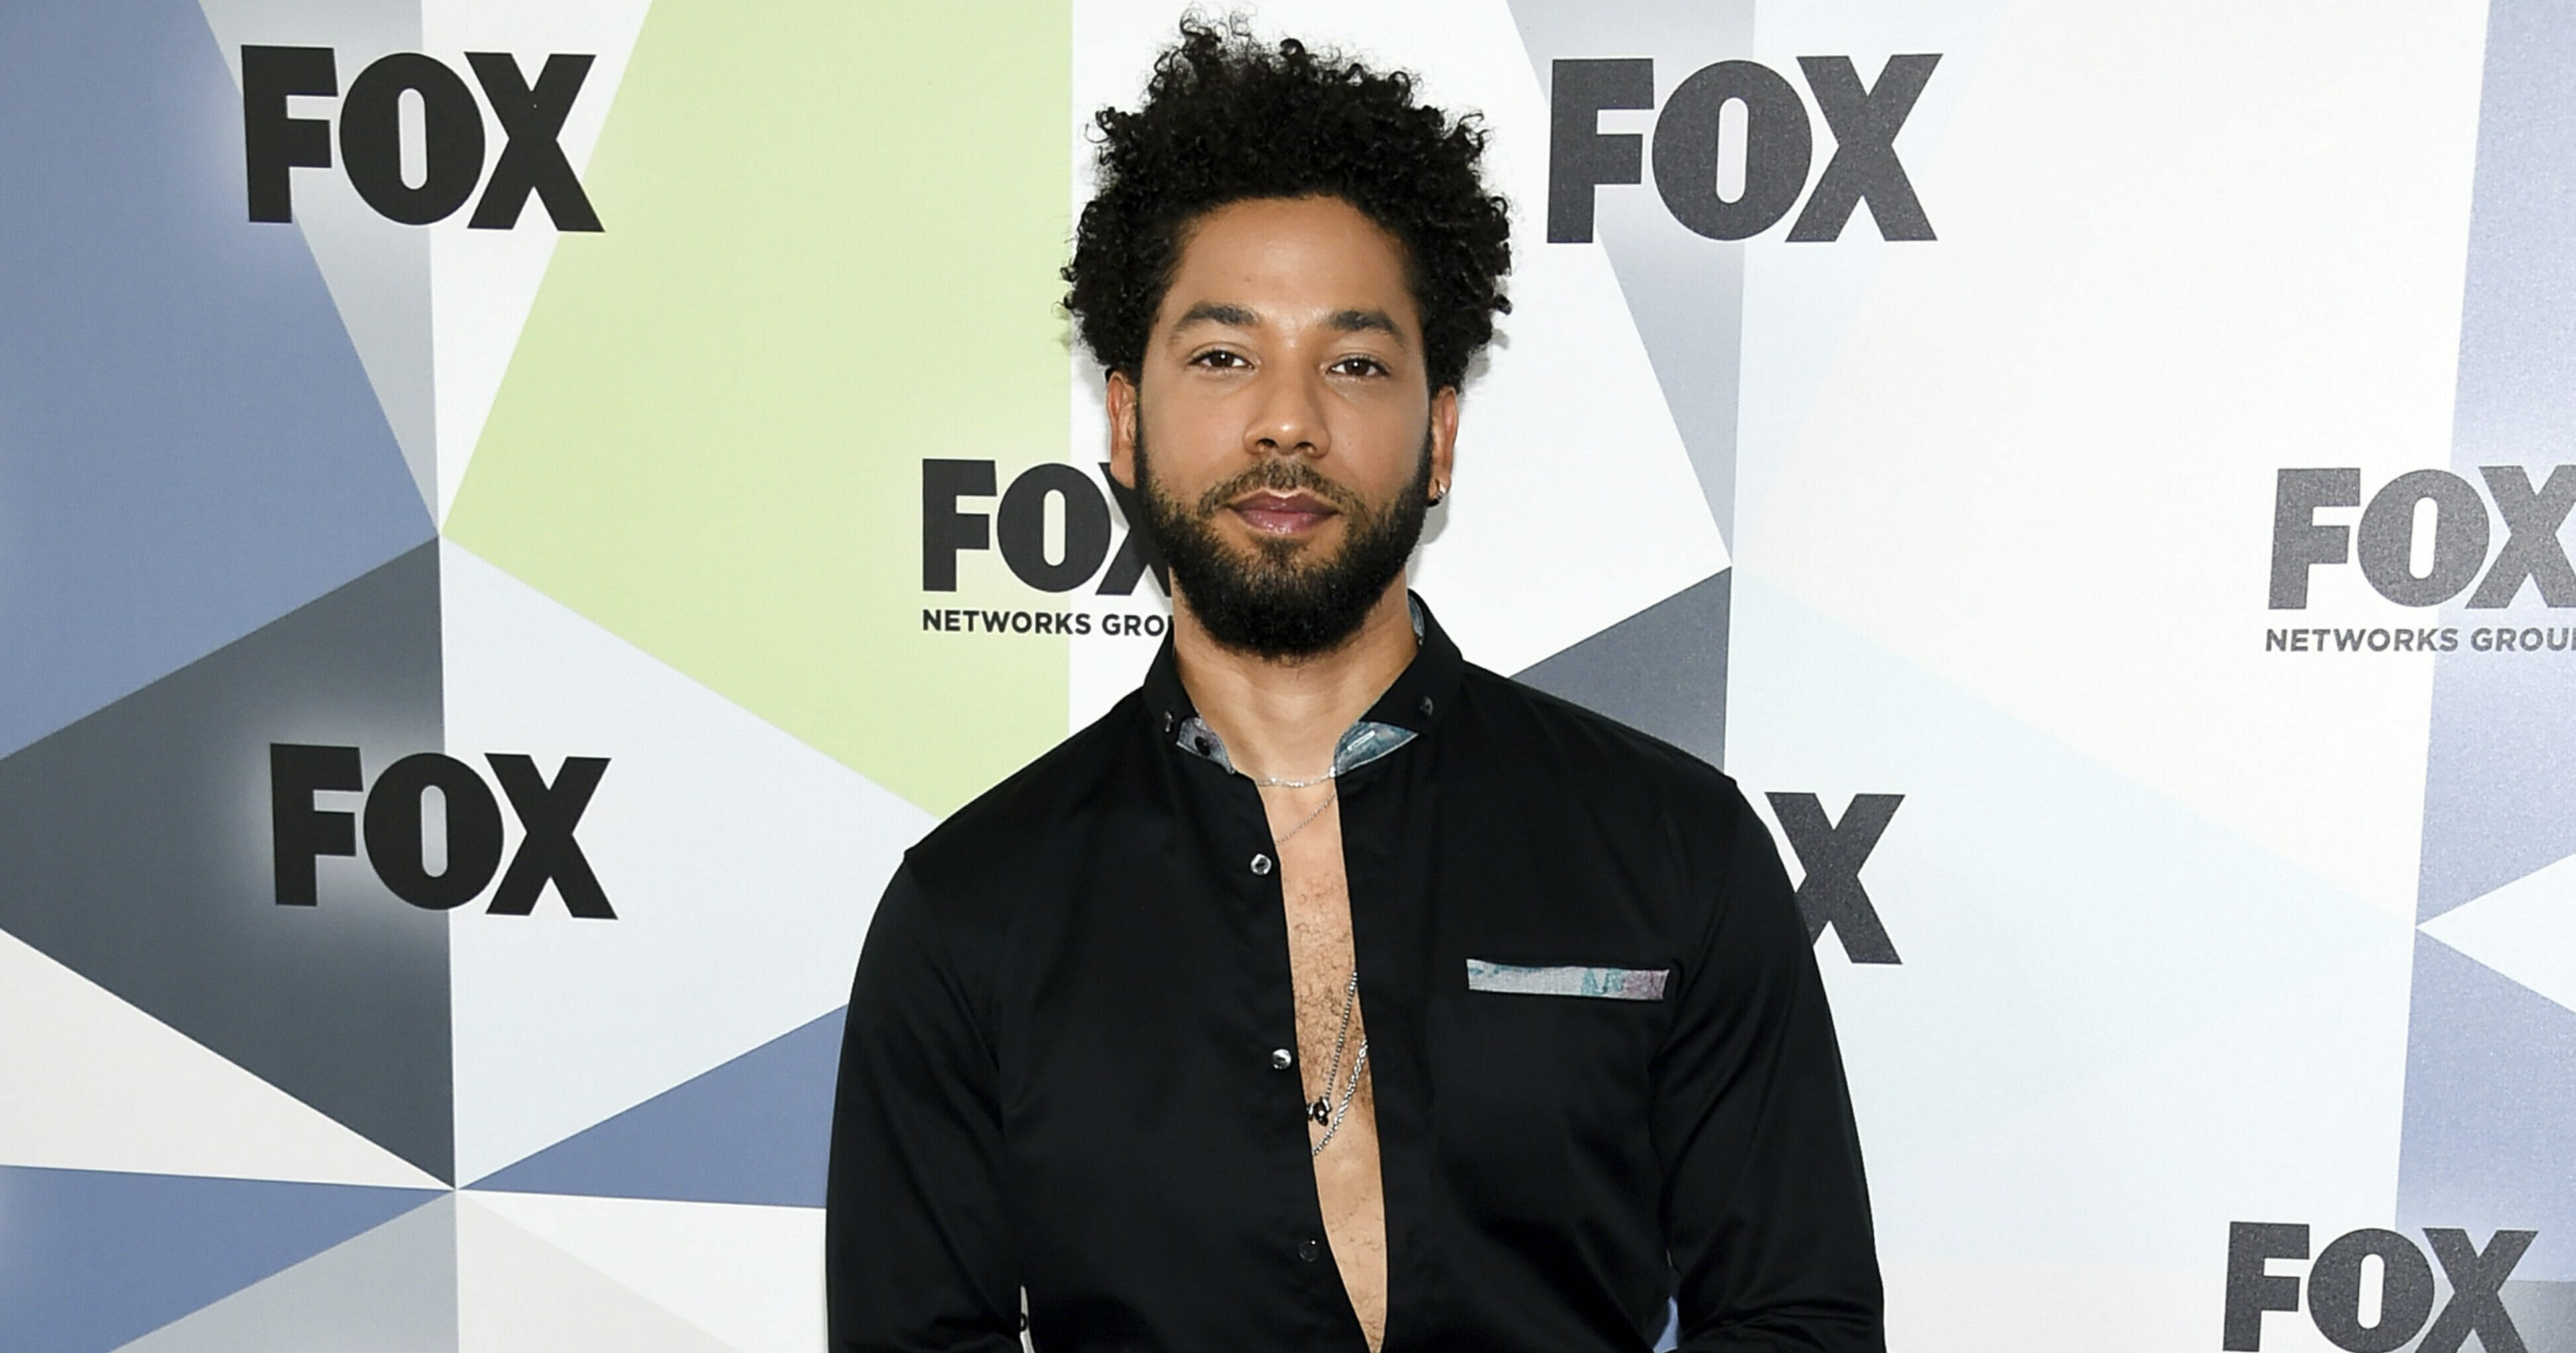 In this Monday, May 14, 2018, file photo, actor and singer Jussie Smollett attends the Fox Networks Group 2018 programming presentation after party at Wollman Rink in Central Park in New York.